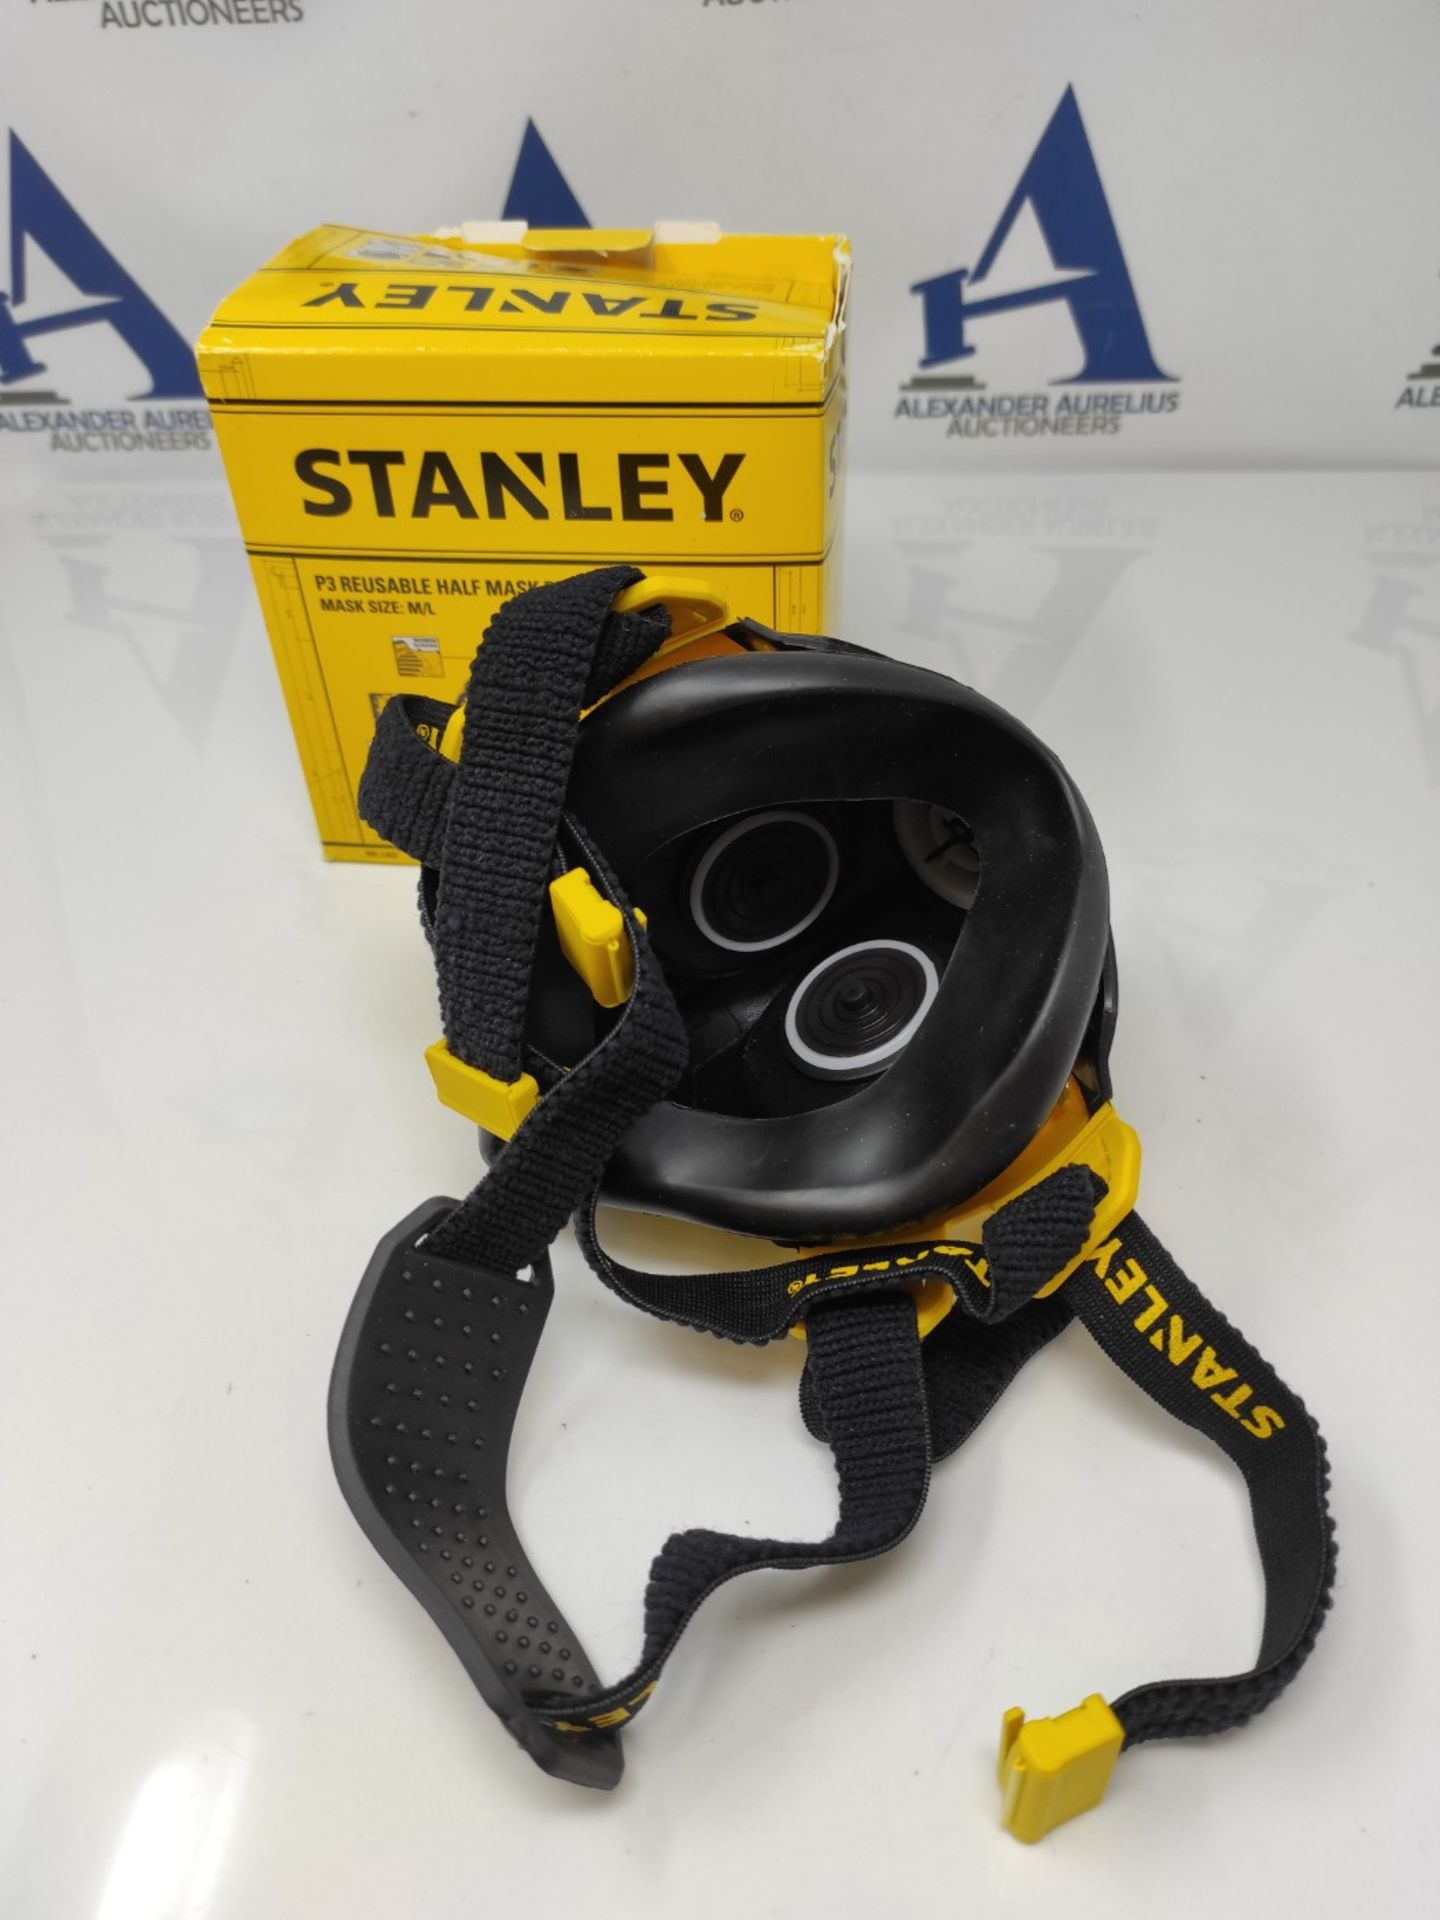 Stanley P3 Dust Mask, Reusable Respirator Mask with Face-Fit-Check Technology & Maximu - Image 2 of 2